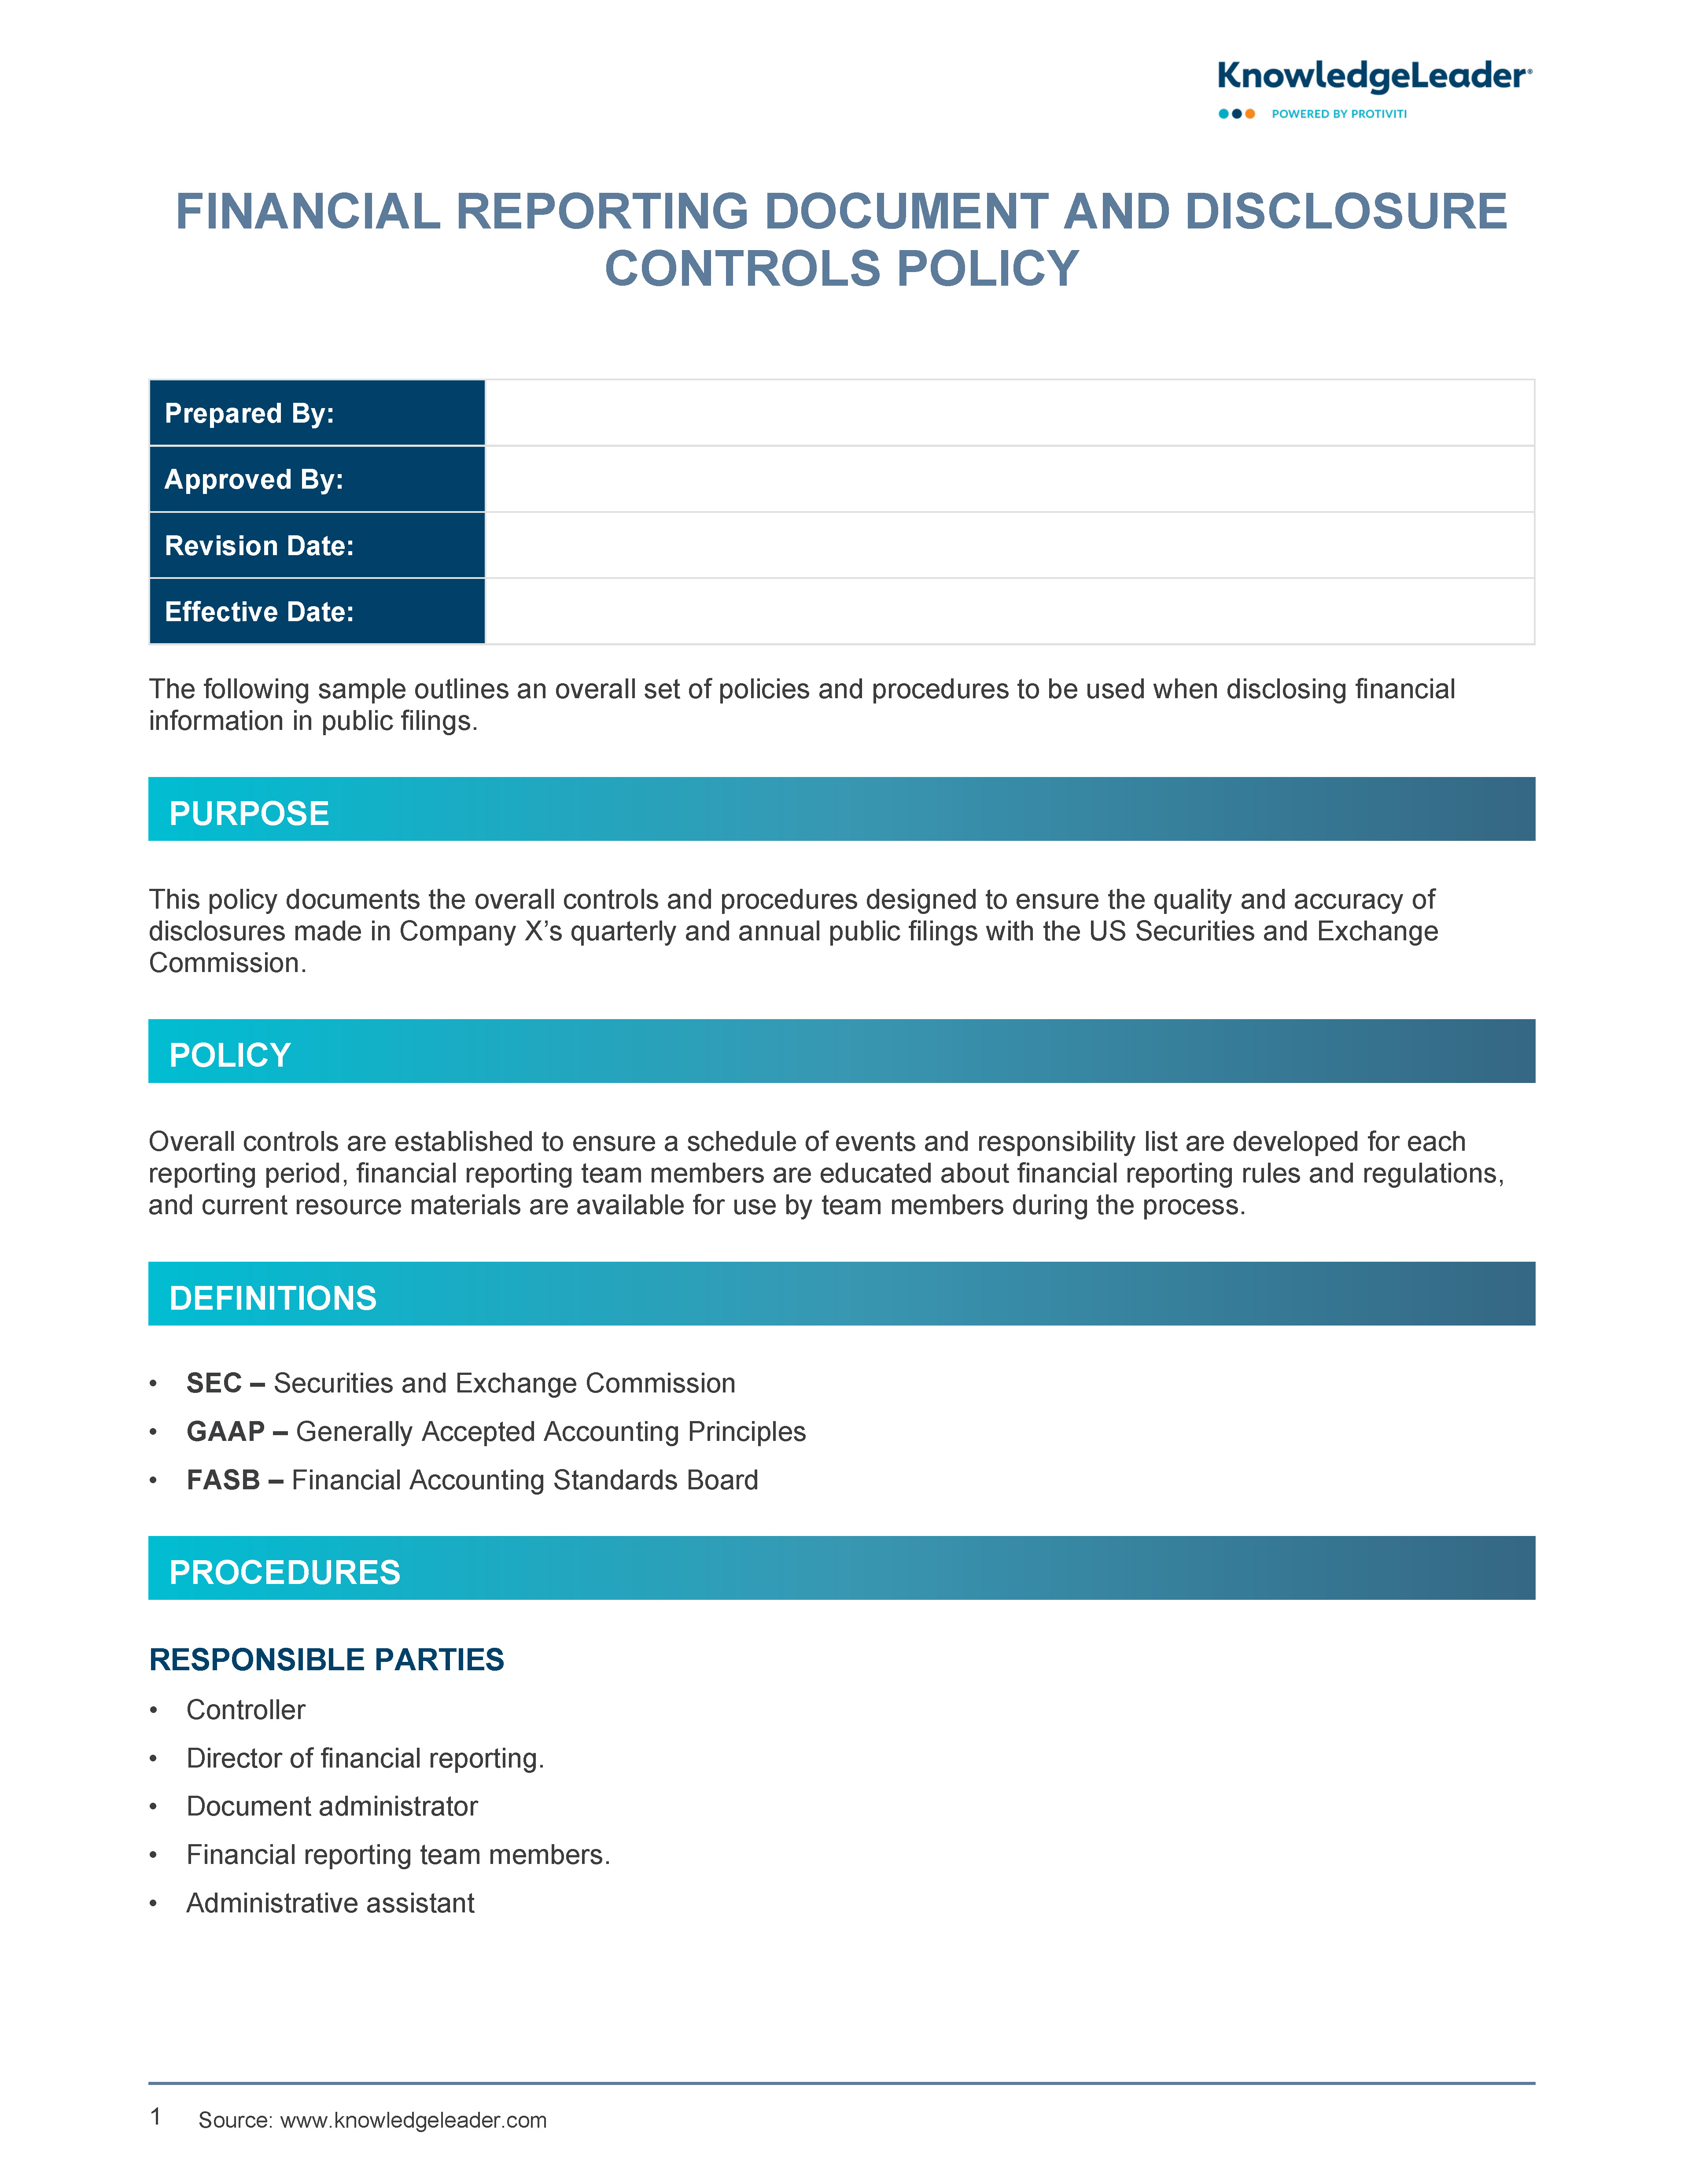 Screenshot of the first page of Financial Reporting Document and Disclosure Controls Policy